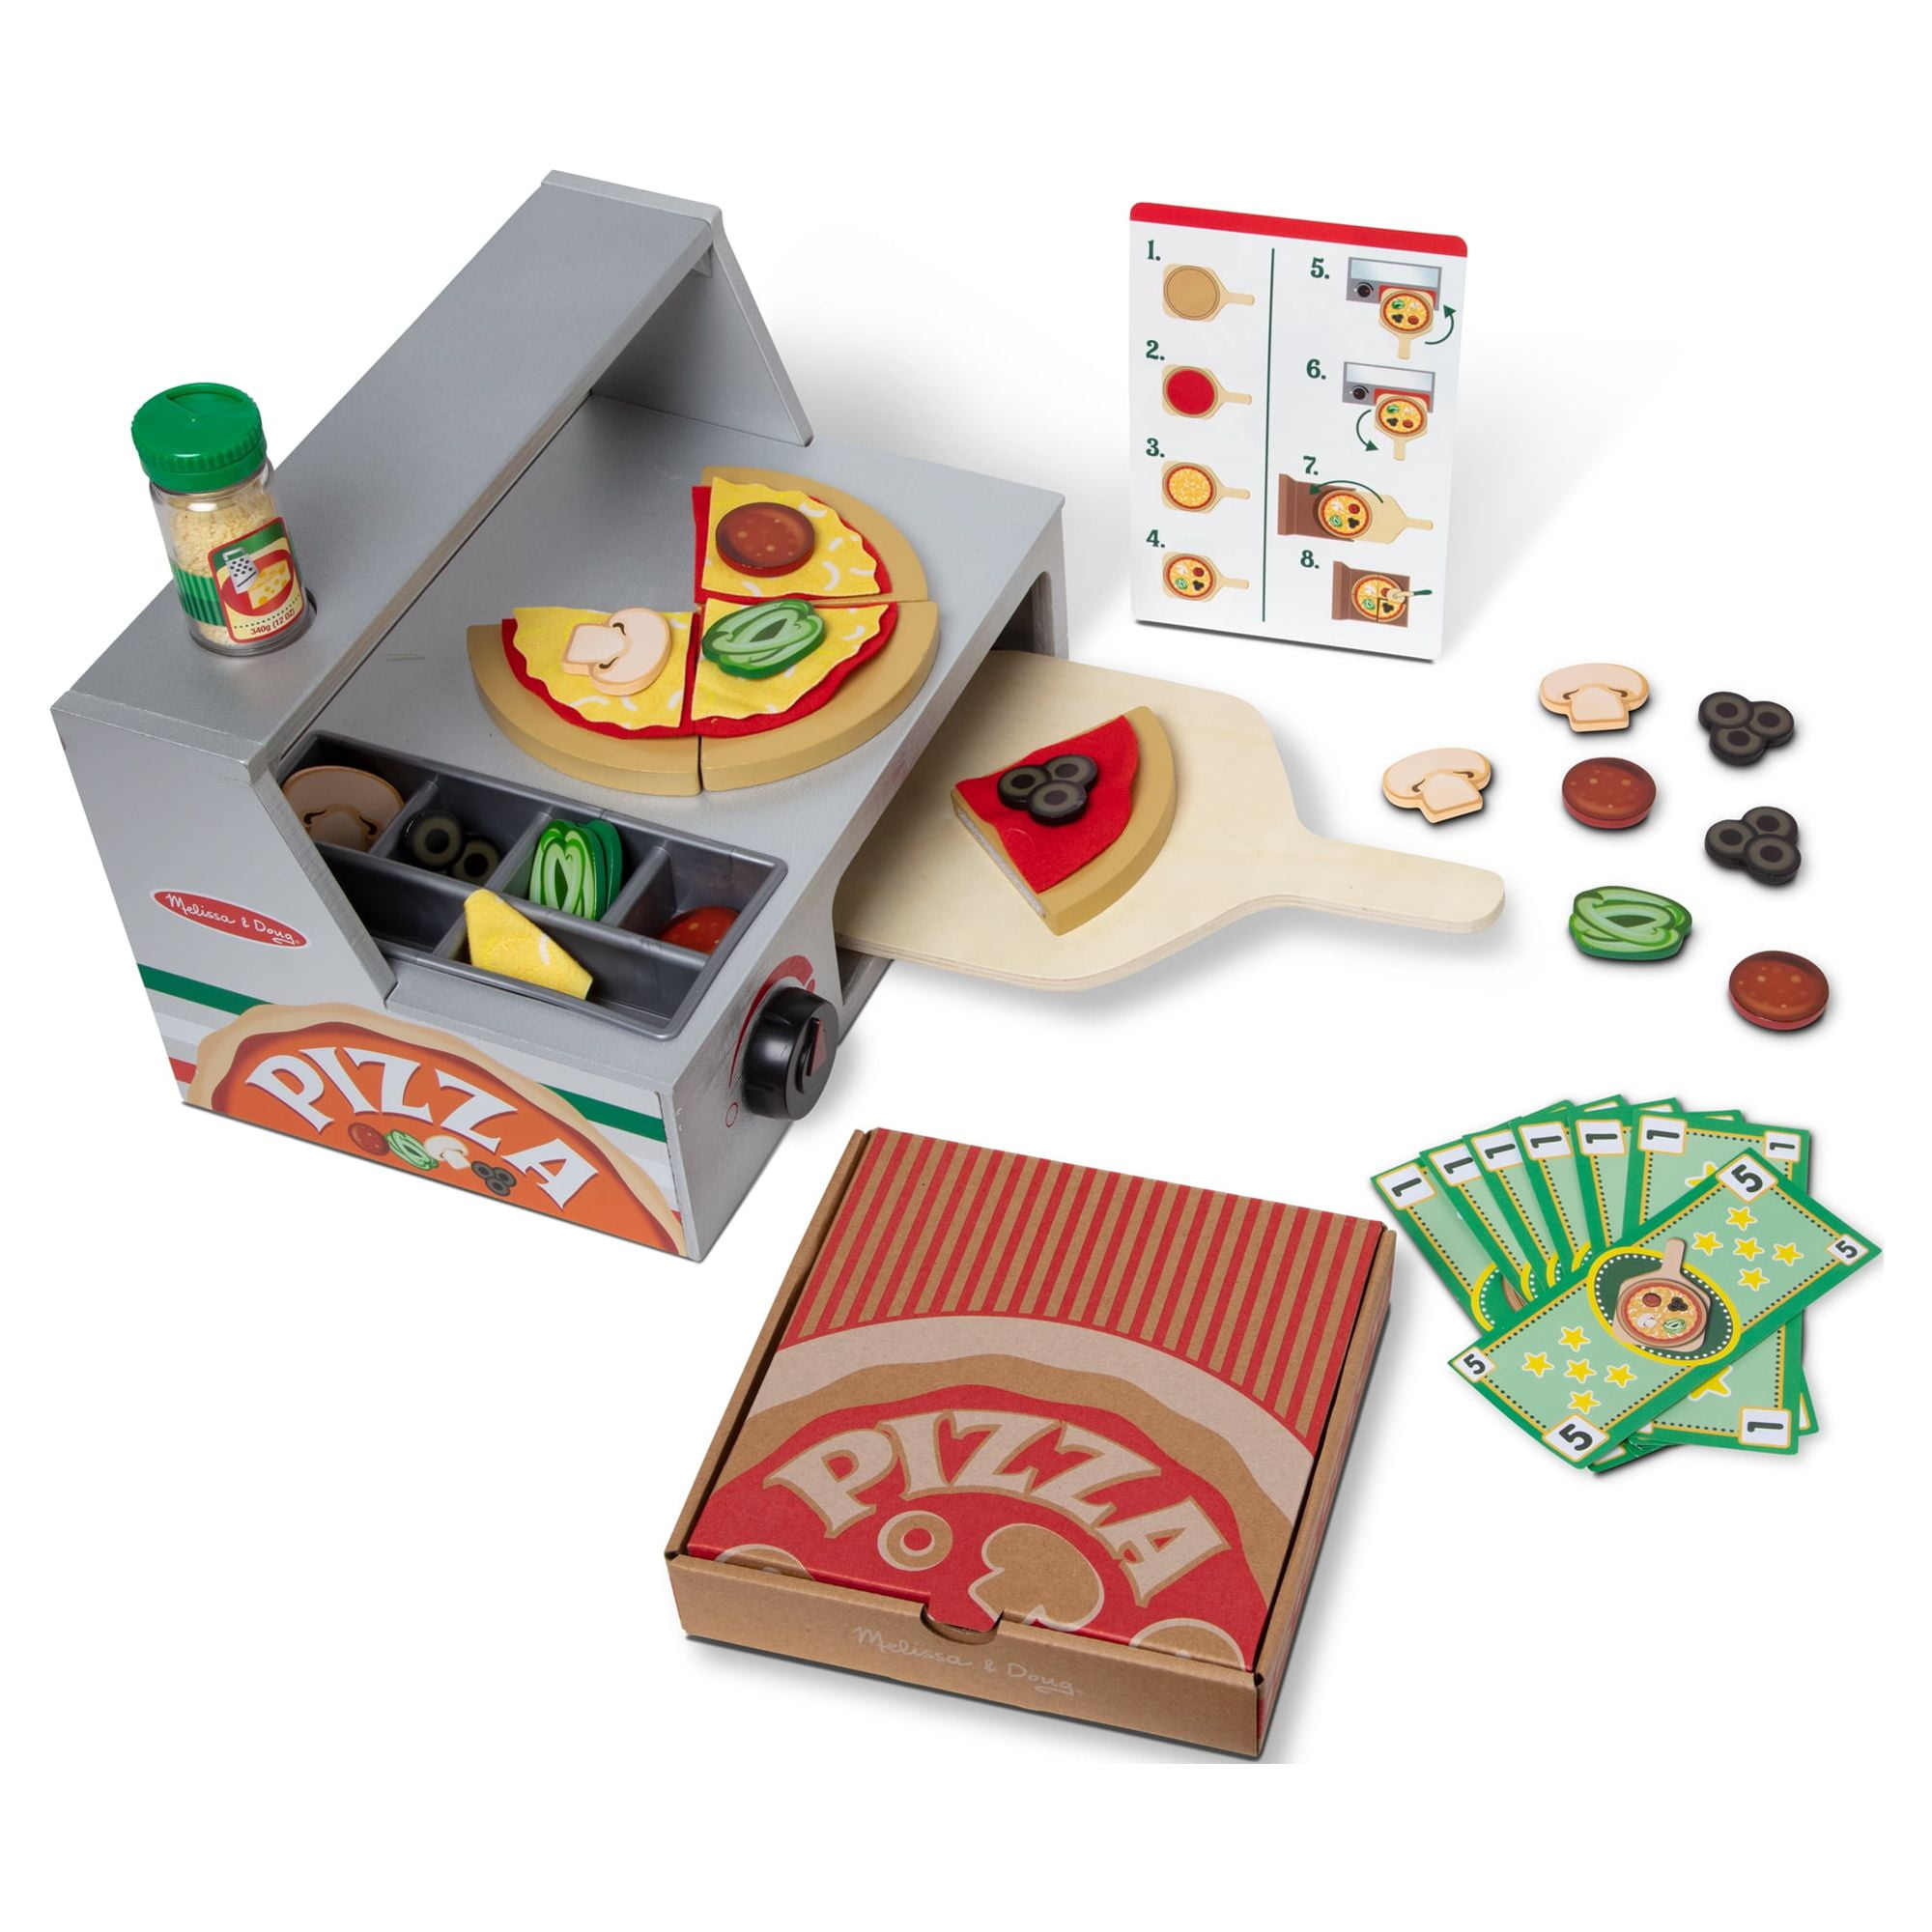 Pillowhale Wooden Toys Pizza Oven with Toppings & Accessories,Wooden Pizza  Counter Playset,Pretend Play Pizza Making Toy Set for Kids Boys Girls 3+